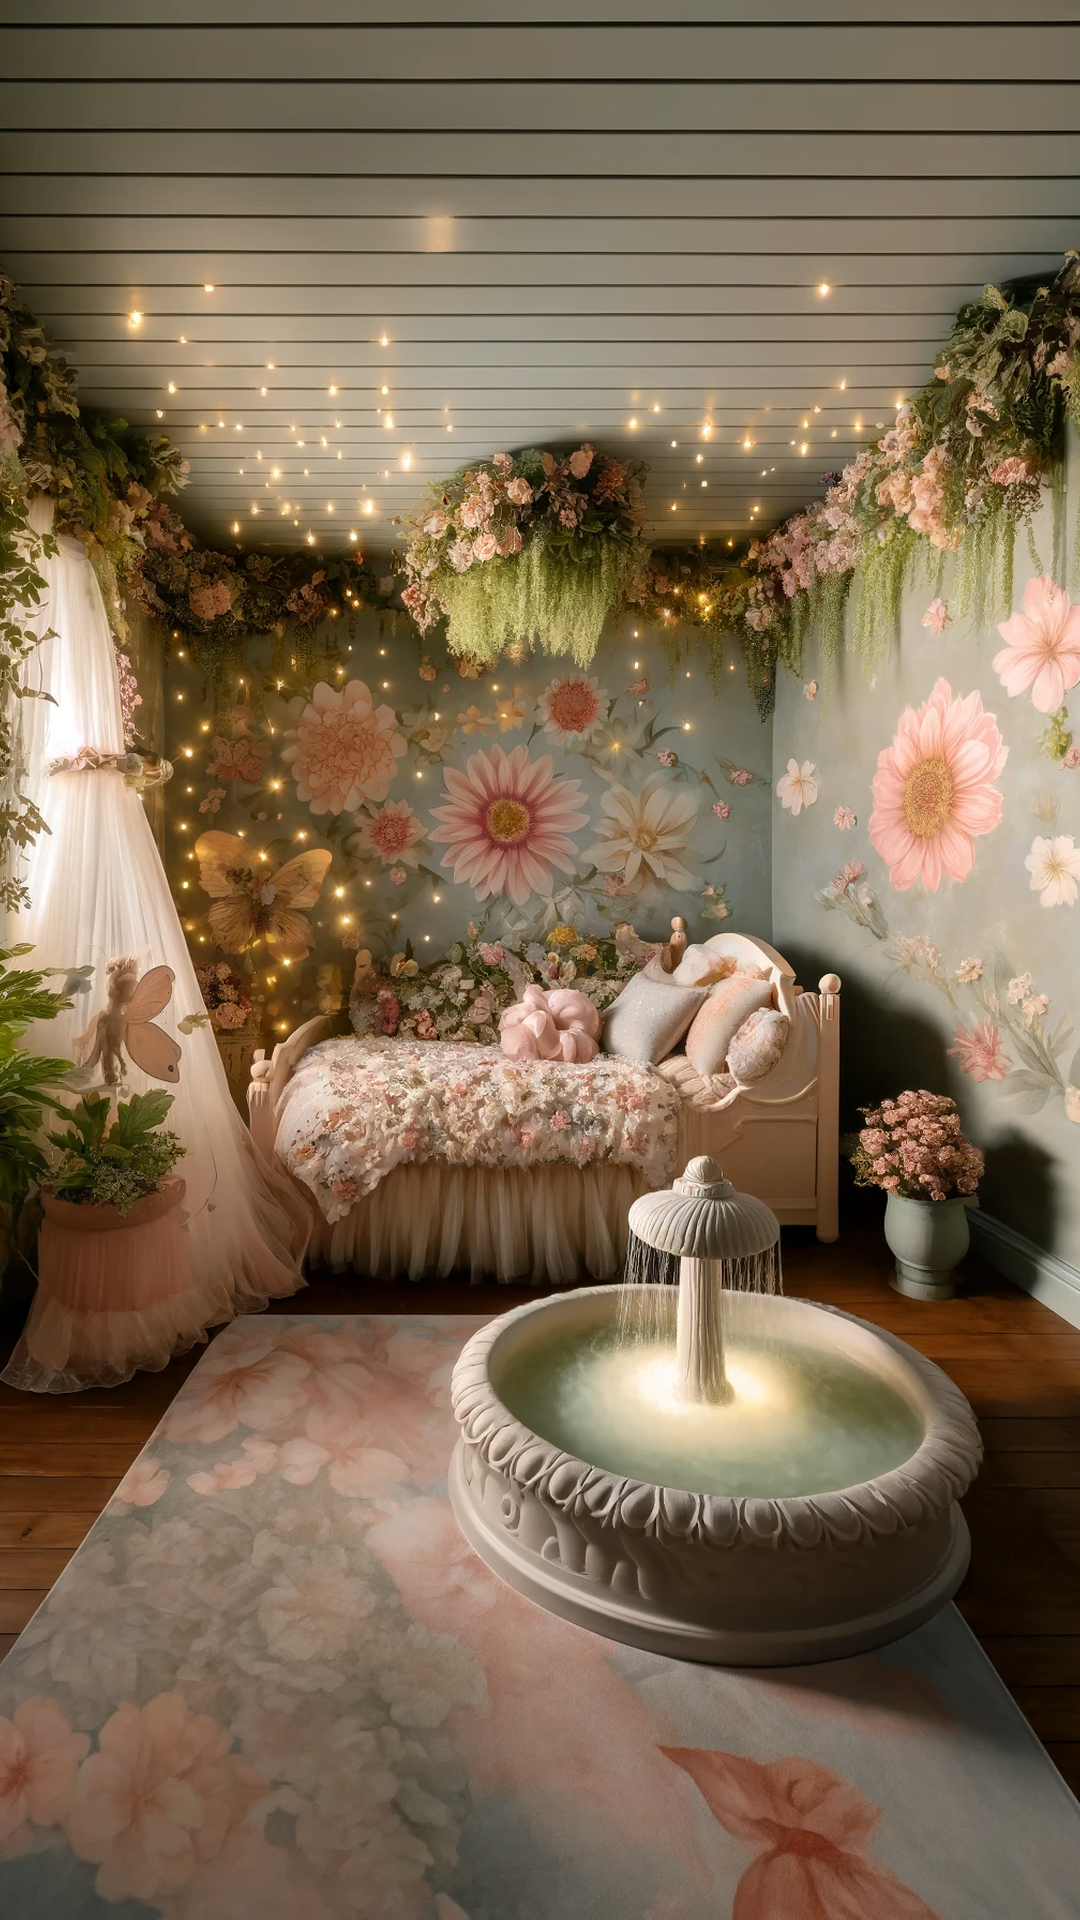 Dreamy Delights: Girly Room Decor Inspirations